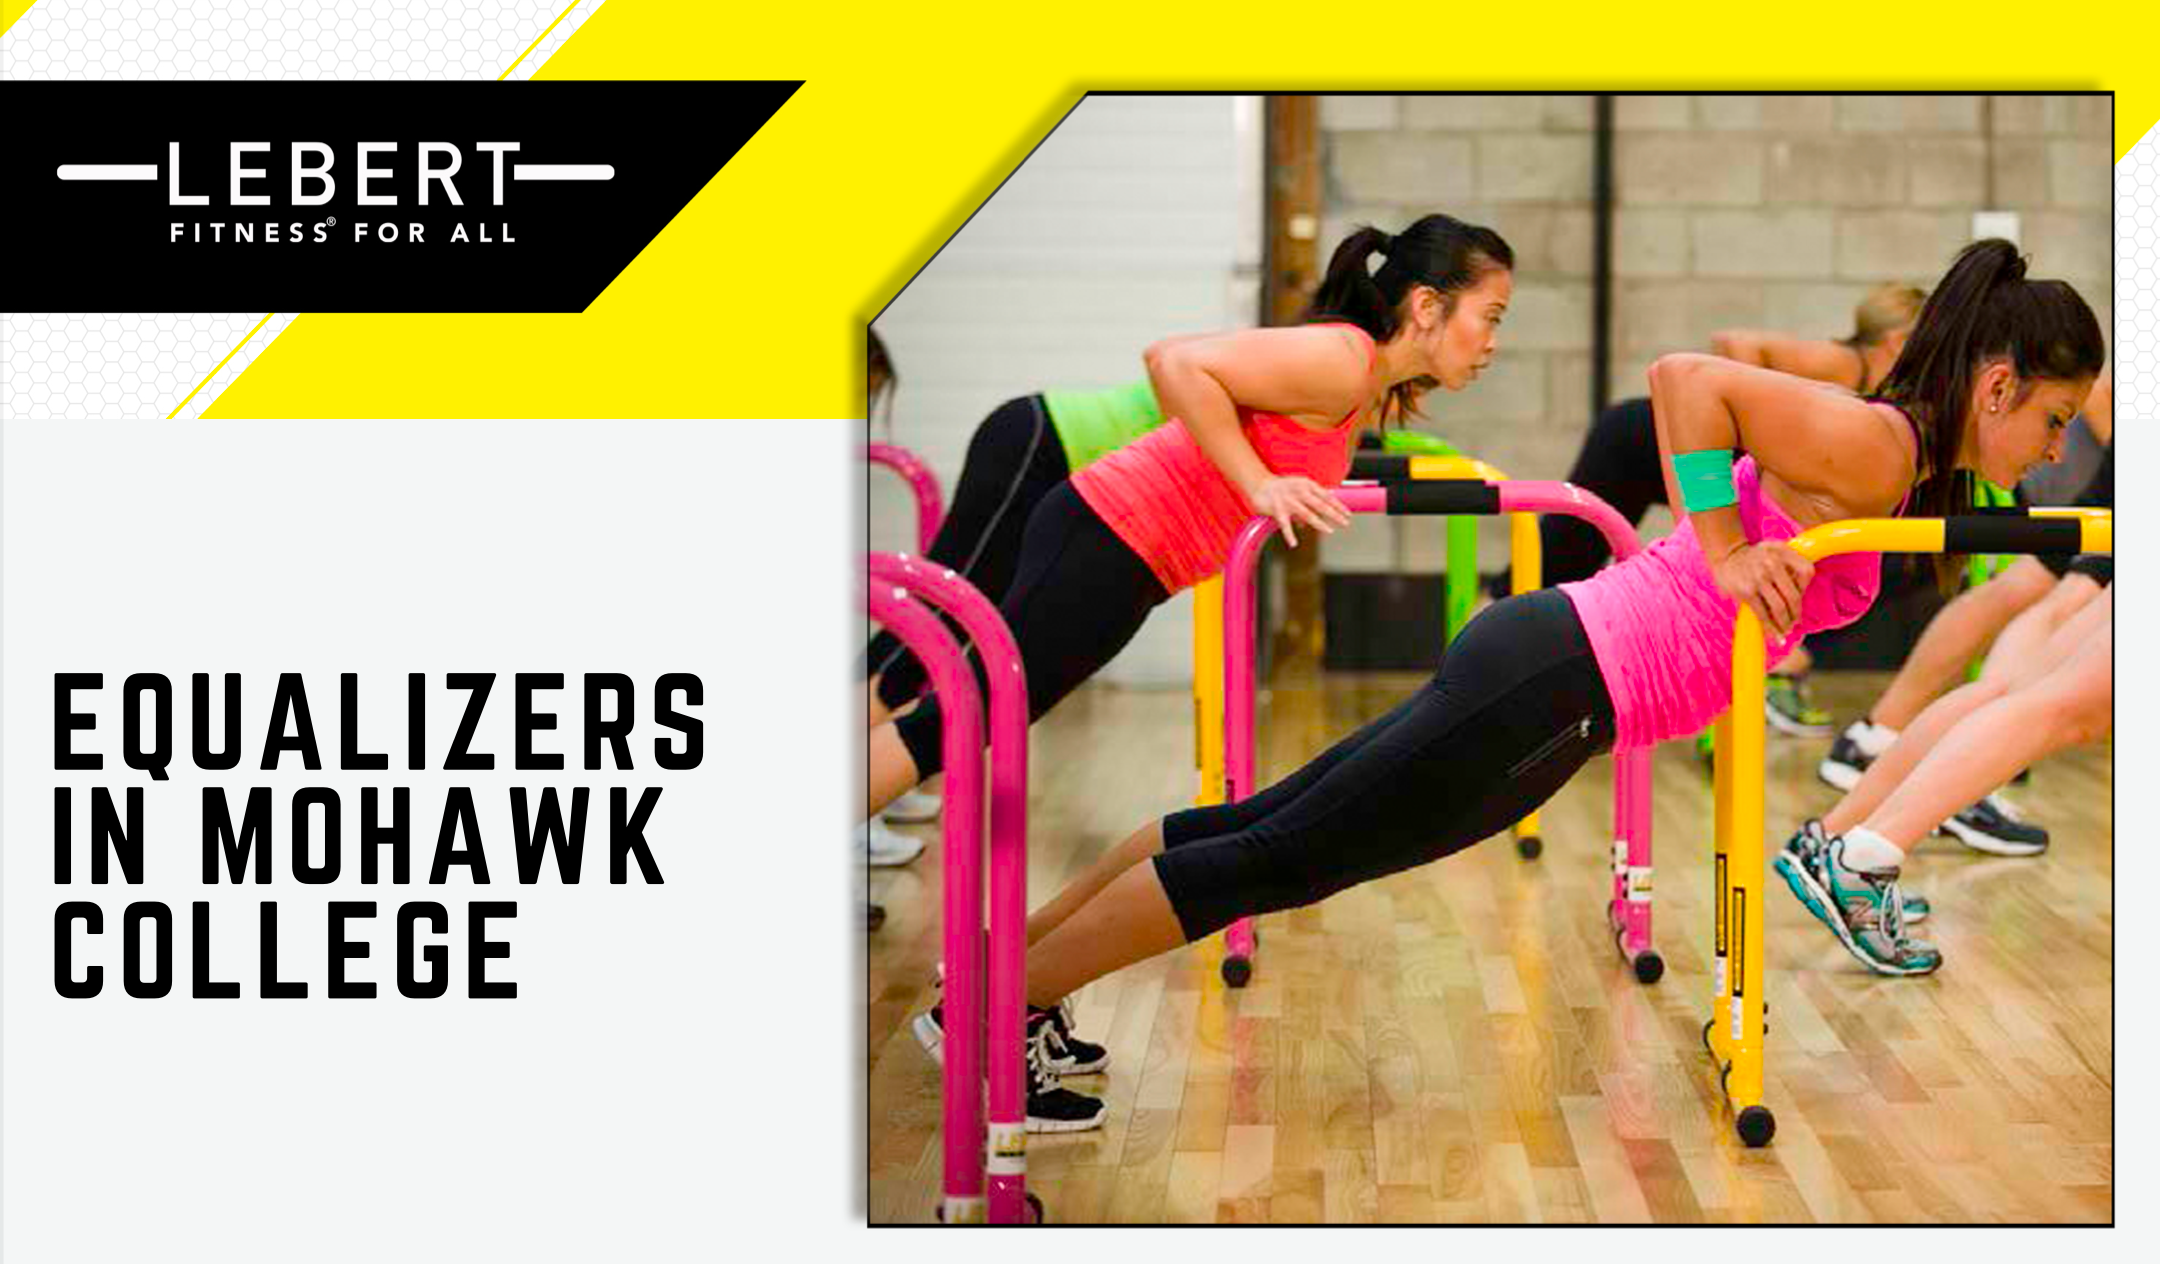 Profile: EQualizers In Mohawk College – Lebert Fitness